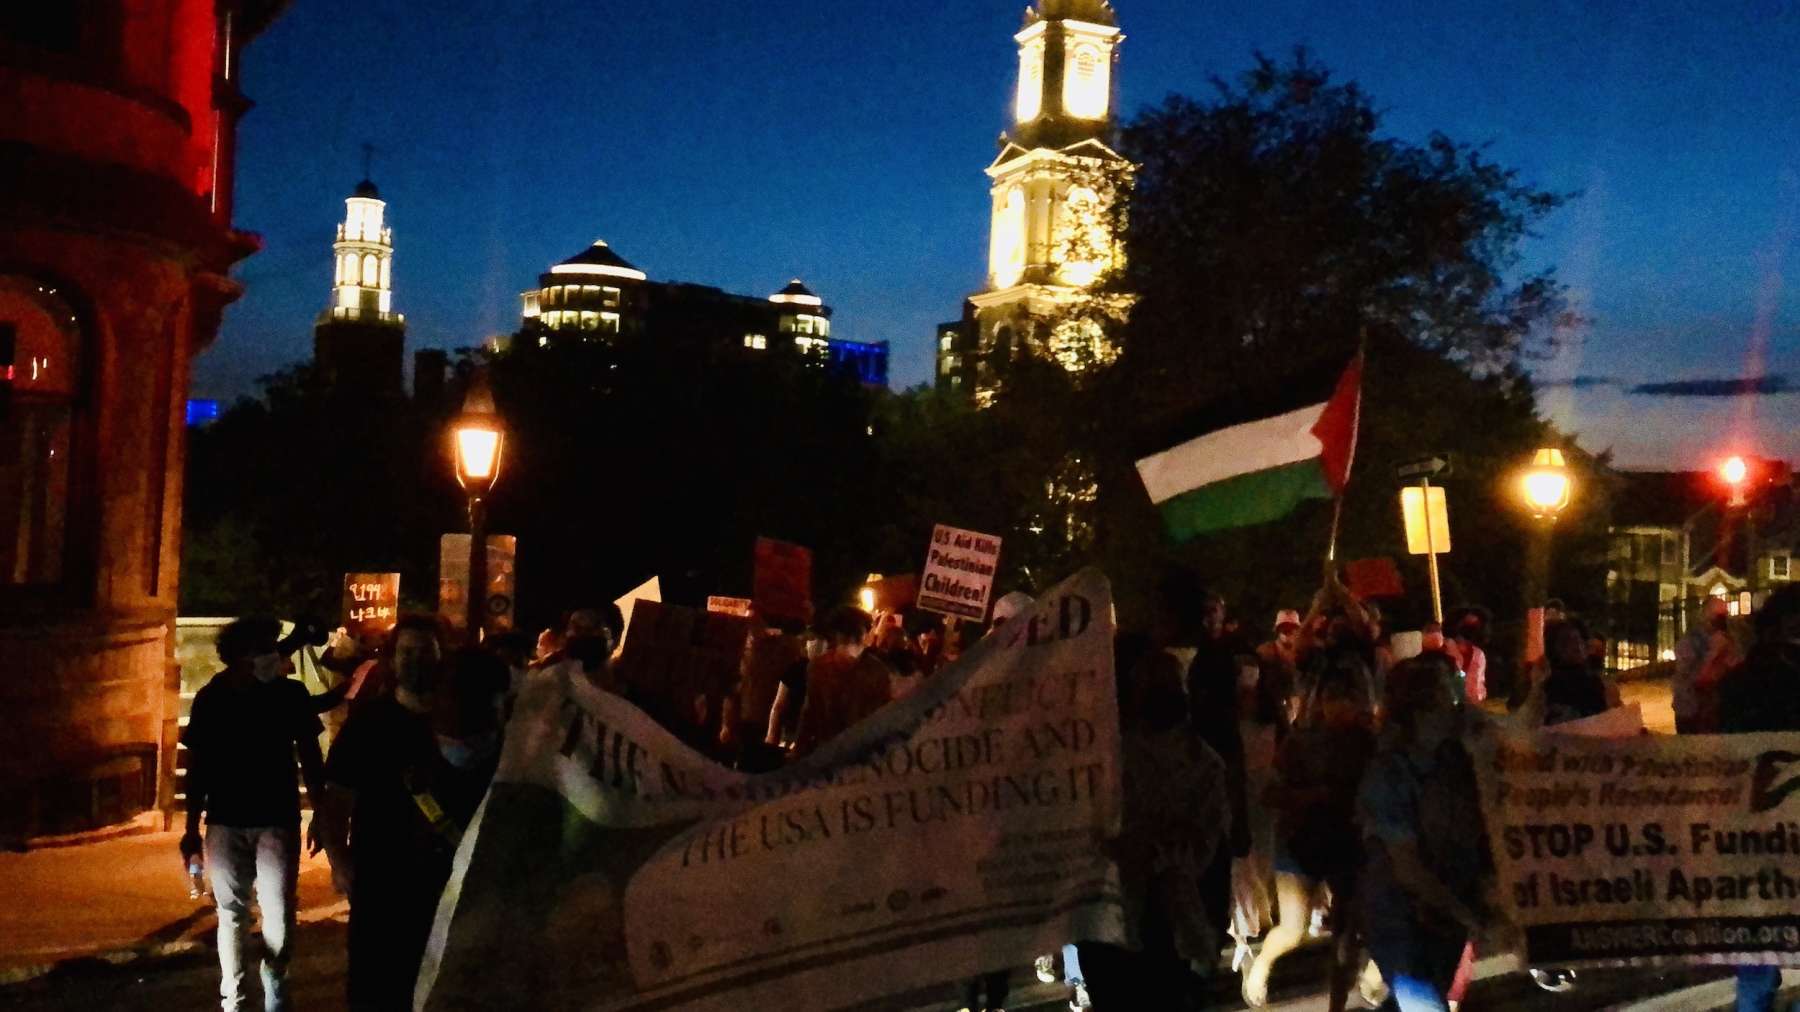 From Providence to Palestine a Rally for Sheikh Jarrah